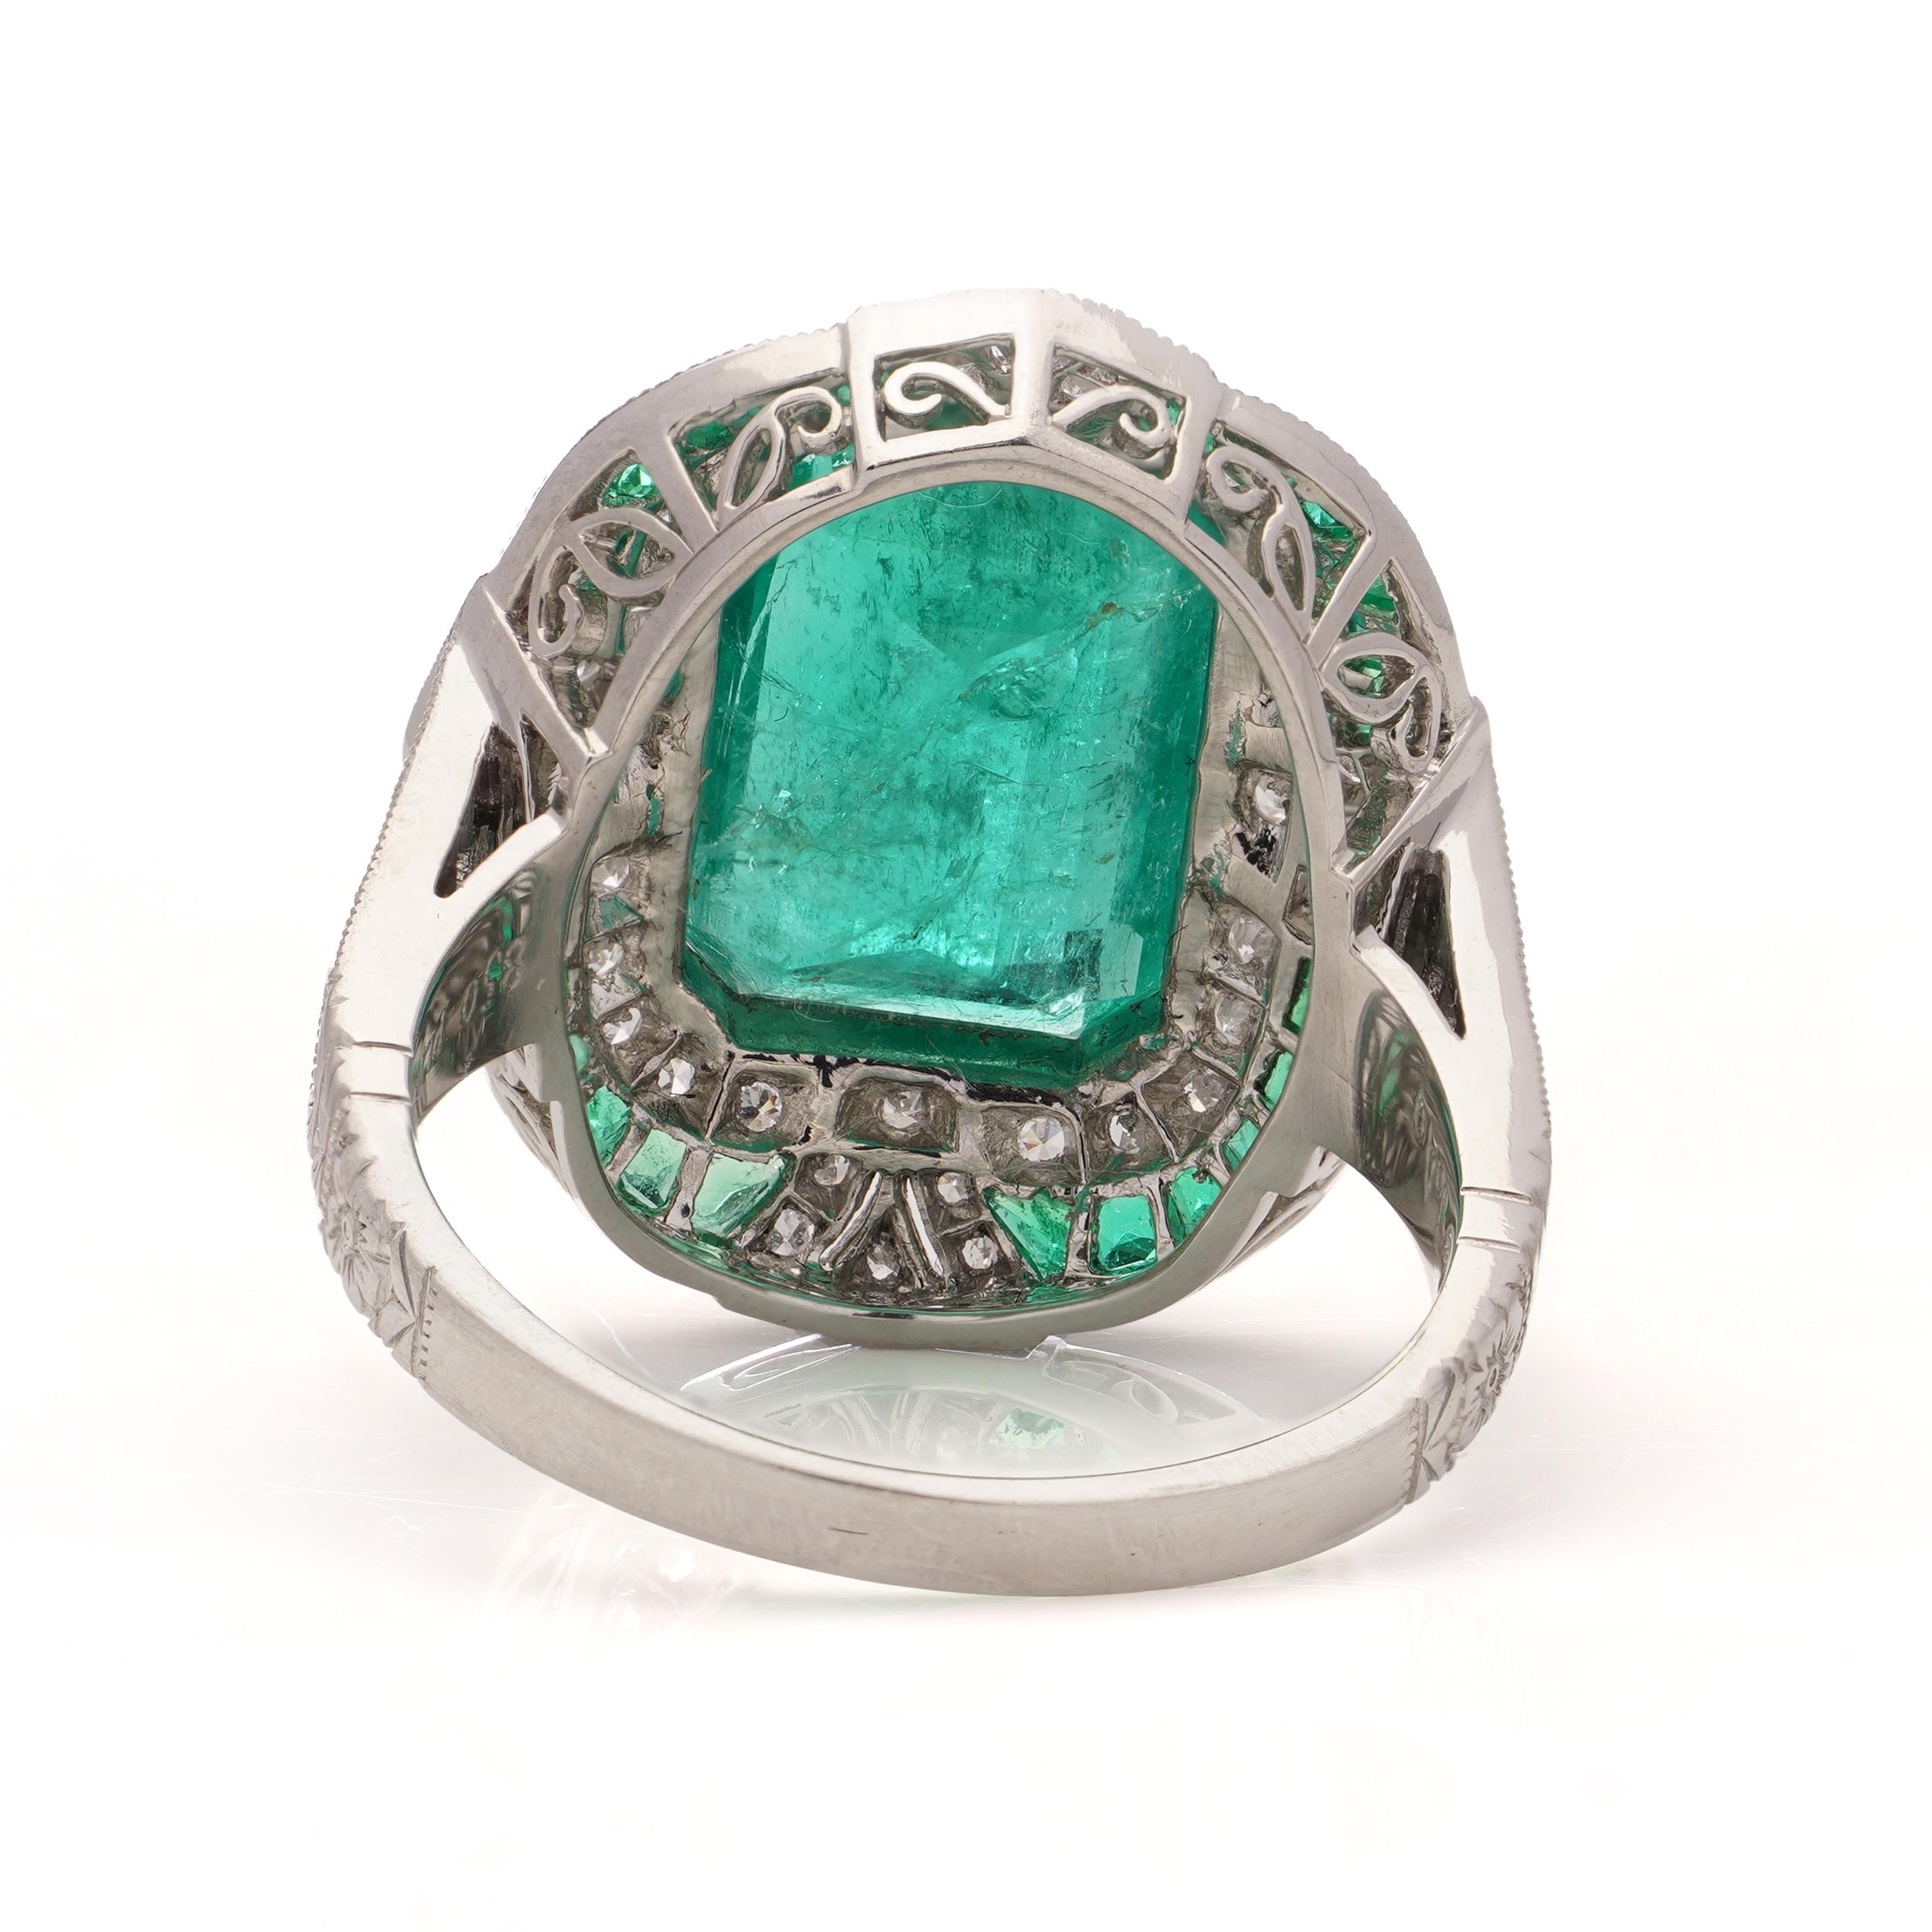 Platinum Art Deco-inspired 4.21 carats of Emerald fashion ring In Excellent Condition For Sale In Braintree, GB